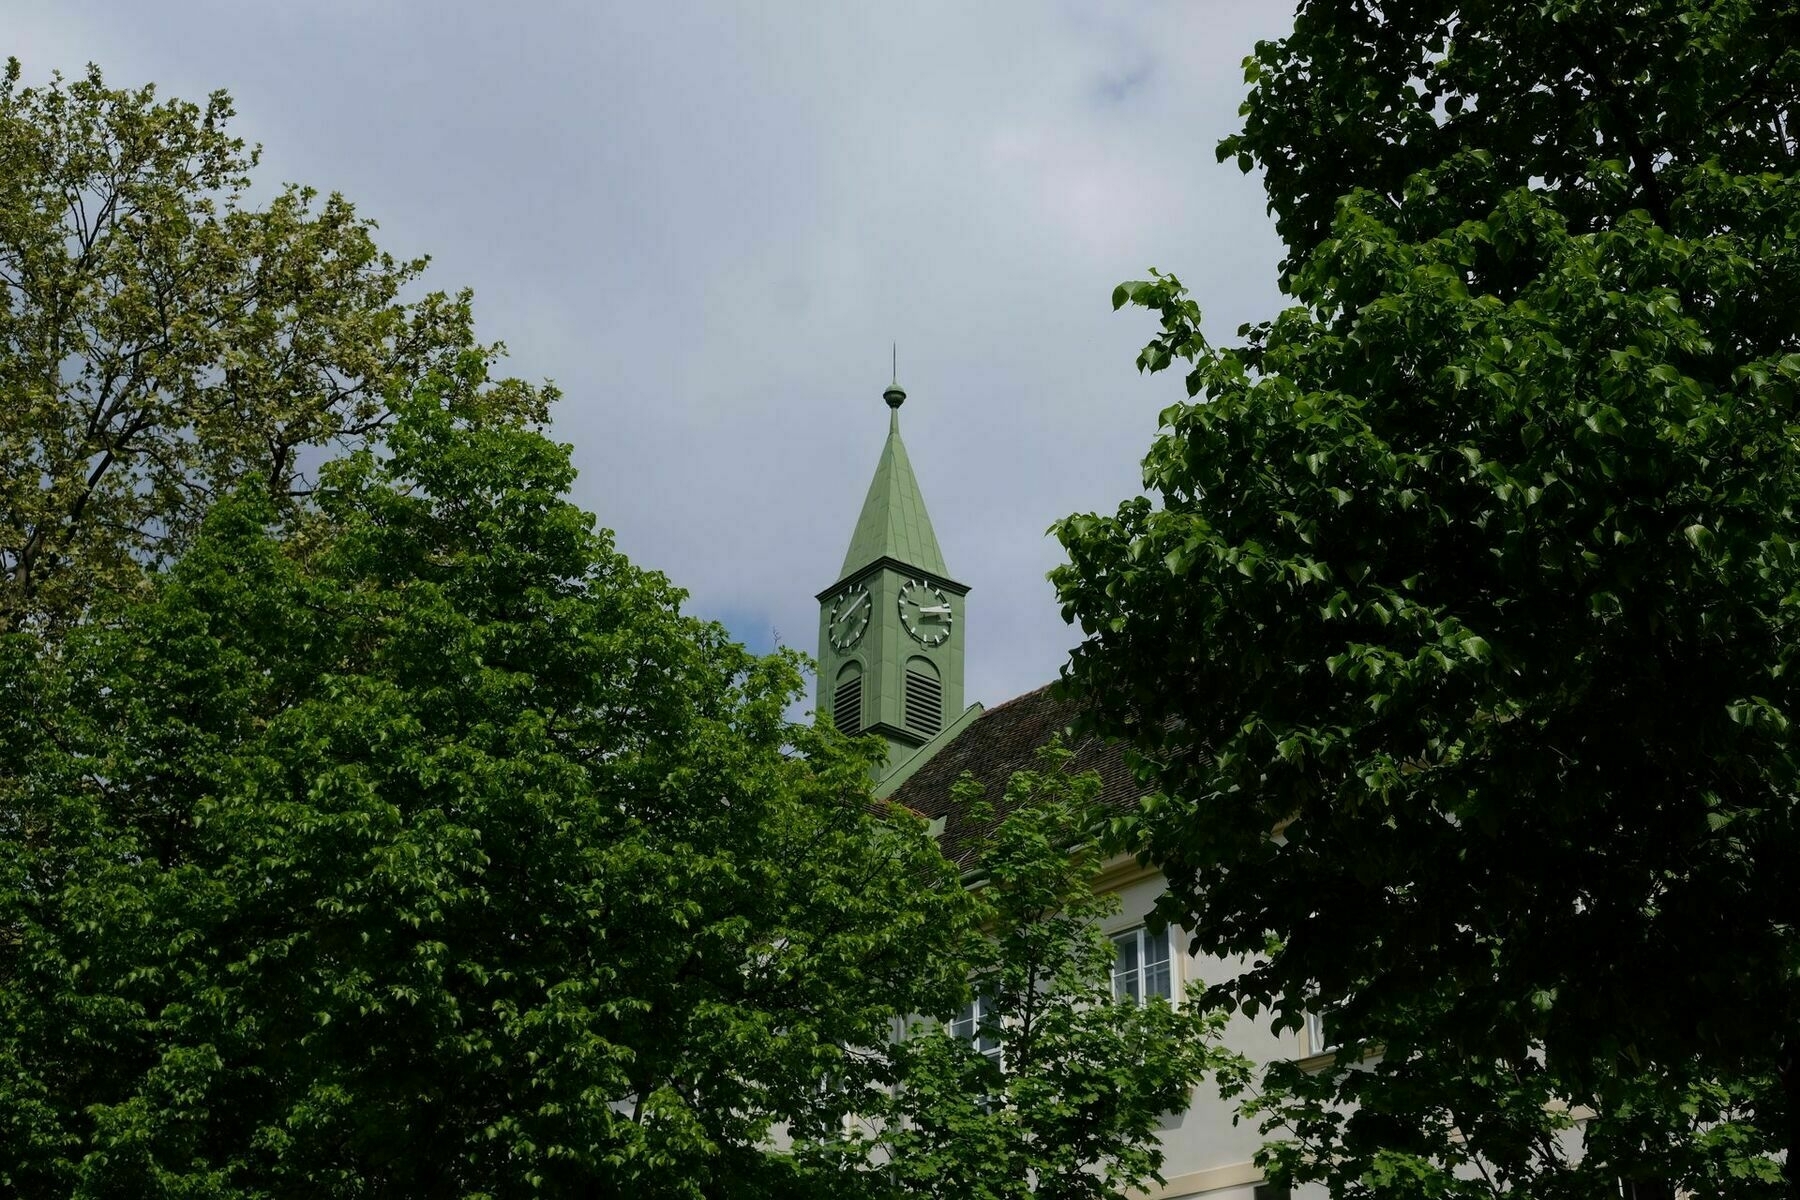 Building with a green turret with a clock on each side, most of the building is hidden by trees, but the turret is in clear view in the center